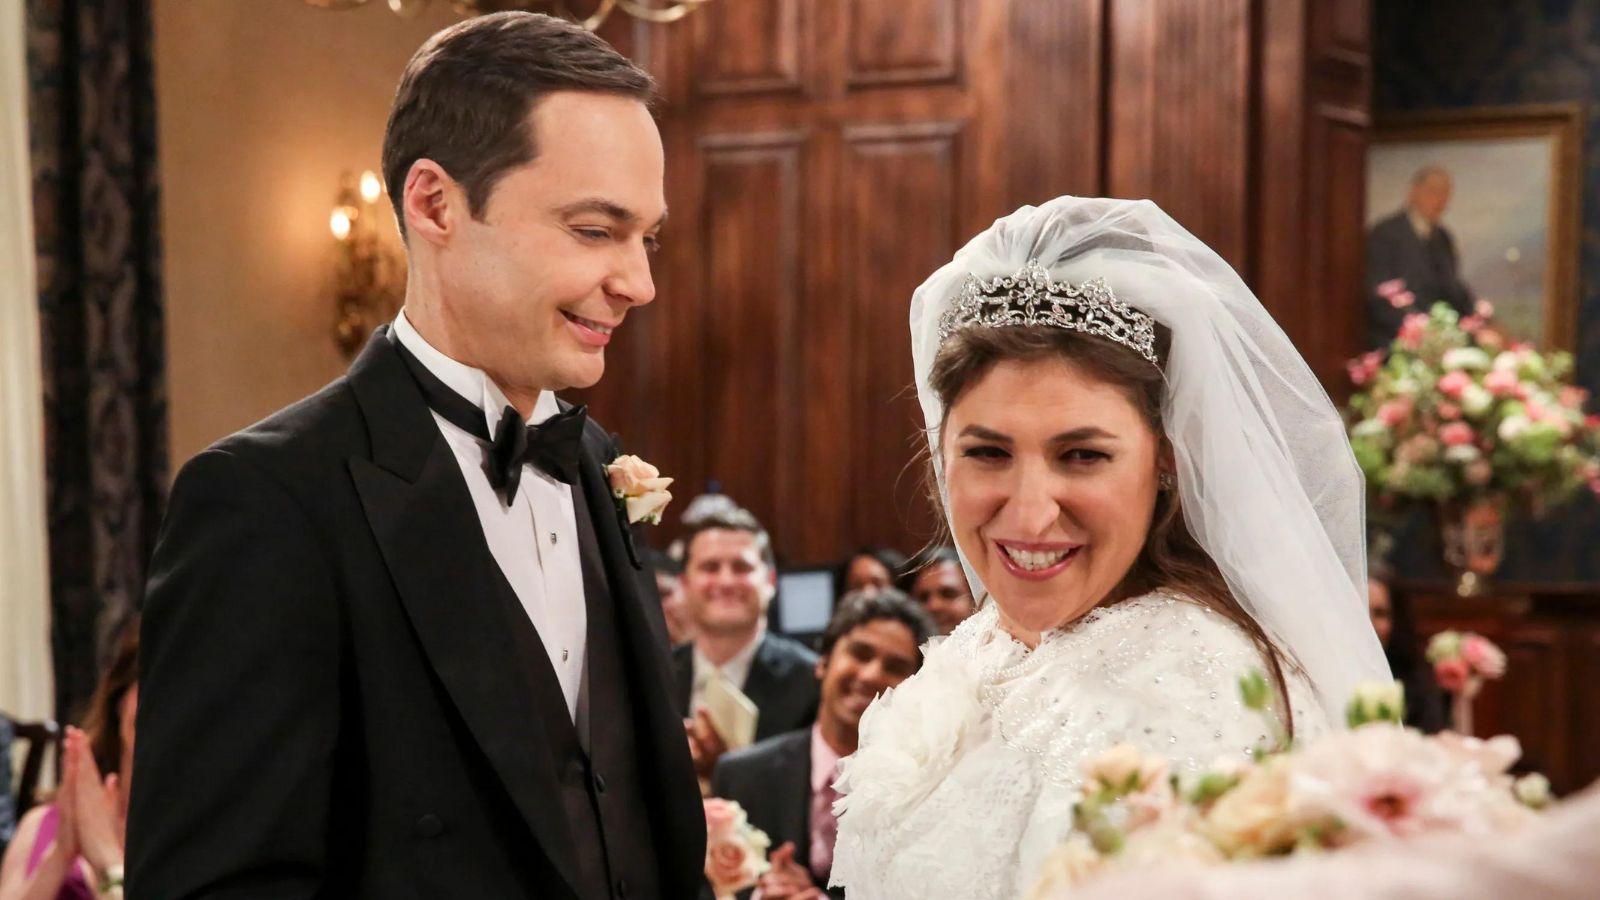 Sheldon and Amy get married in The Big Bang Theory